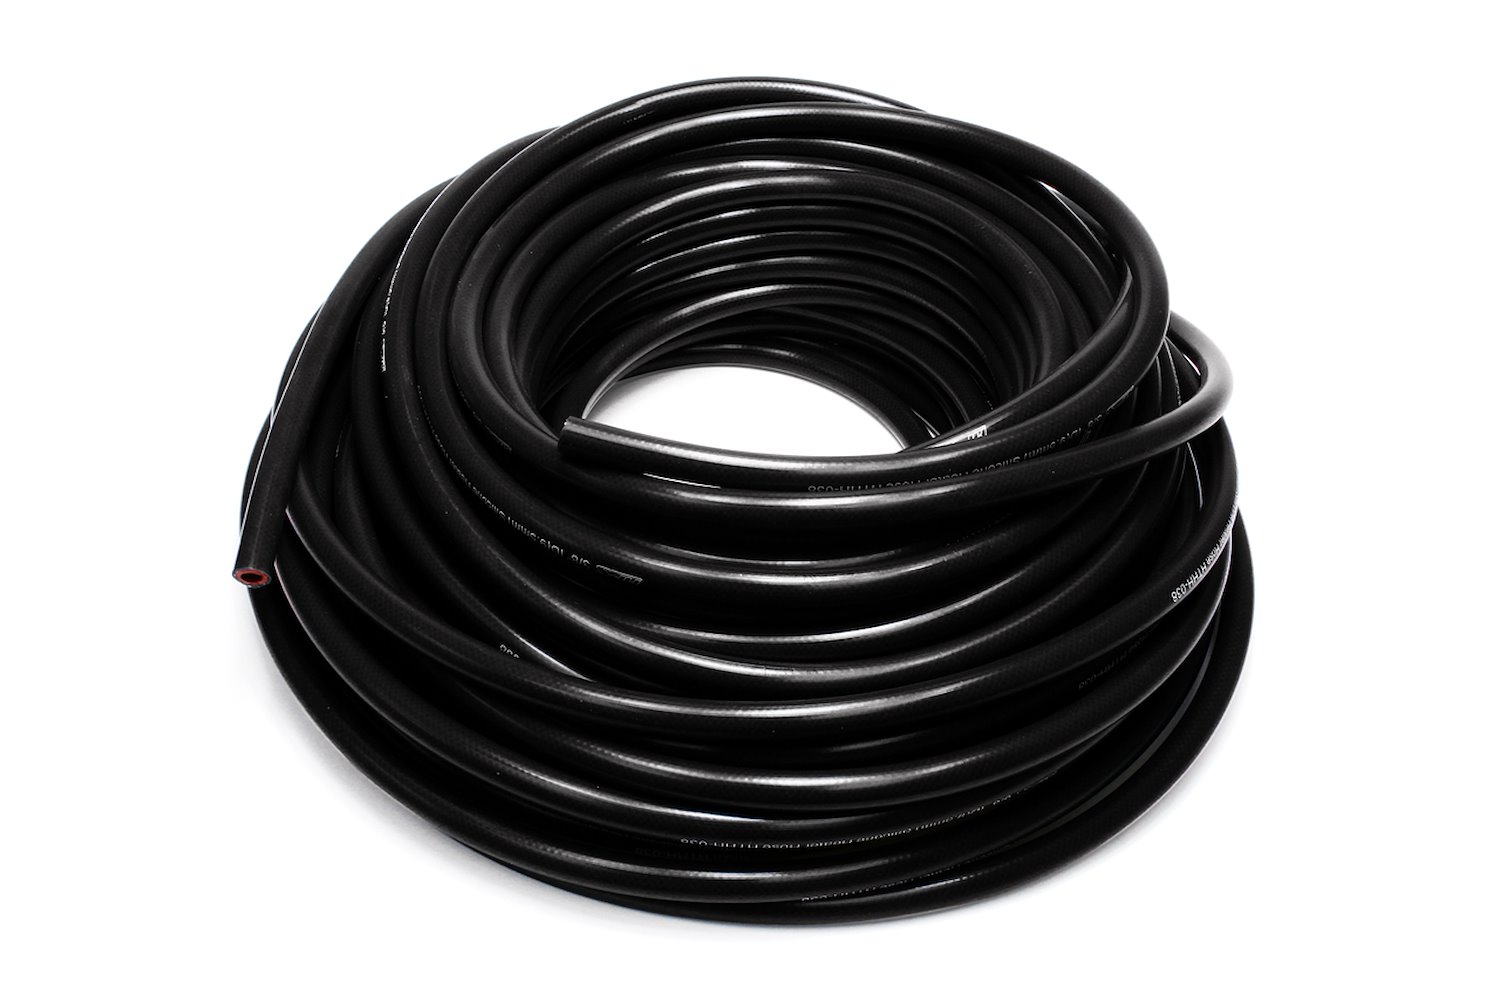 HTHH-038-BLKx100 Silicone Heater Hose Tubing, High-Temp Reinforced, 3/8 in. ID, 100 ft. Roll, Black